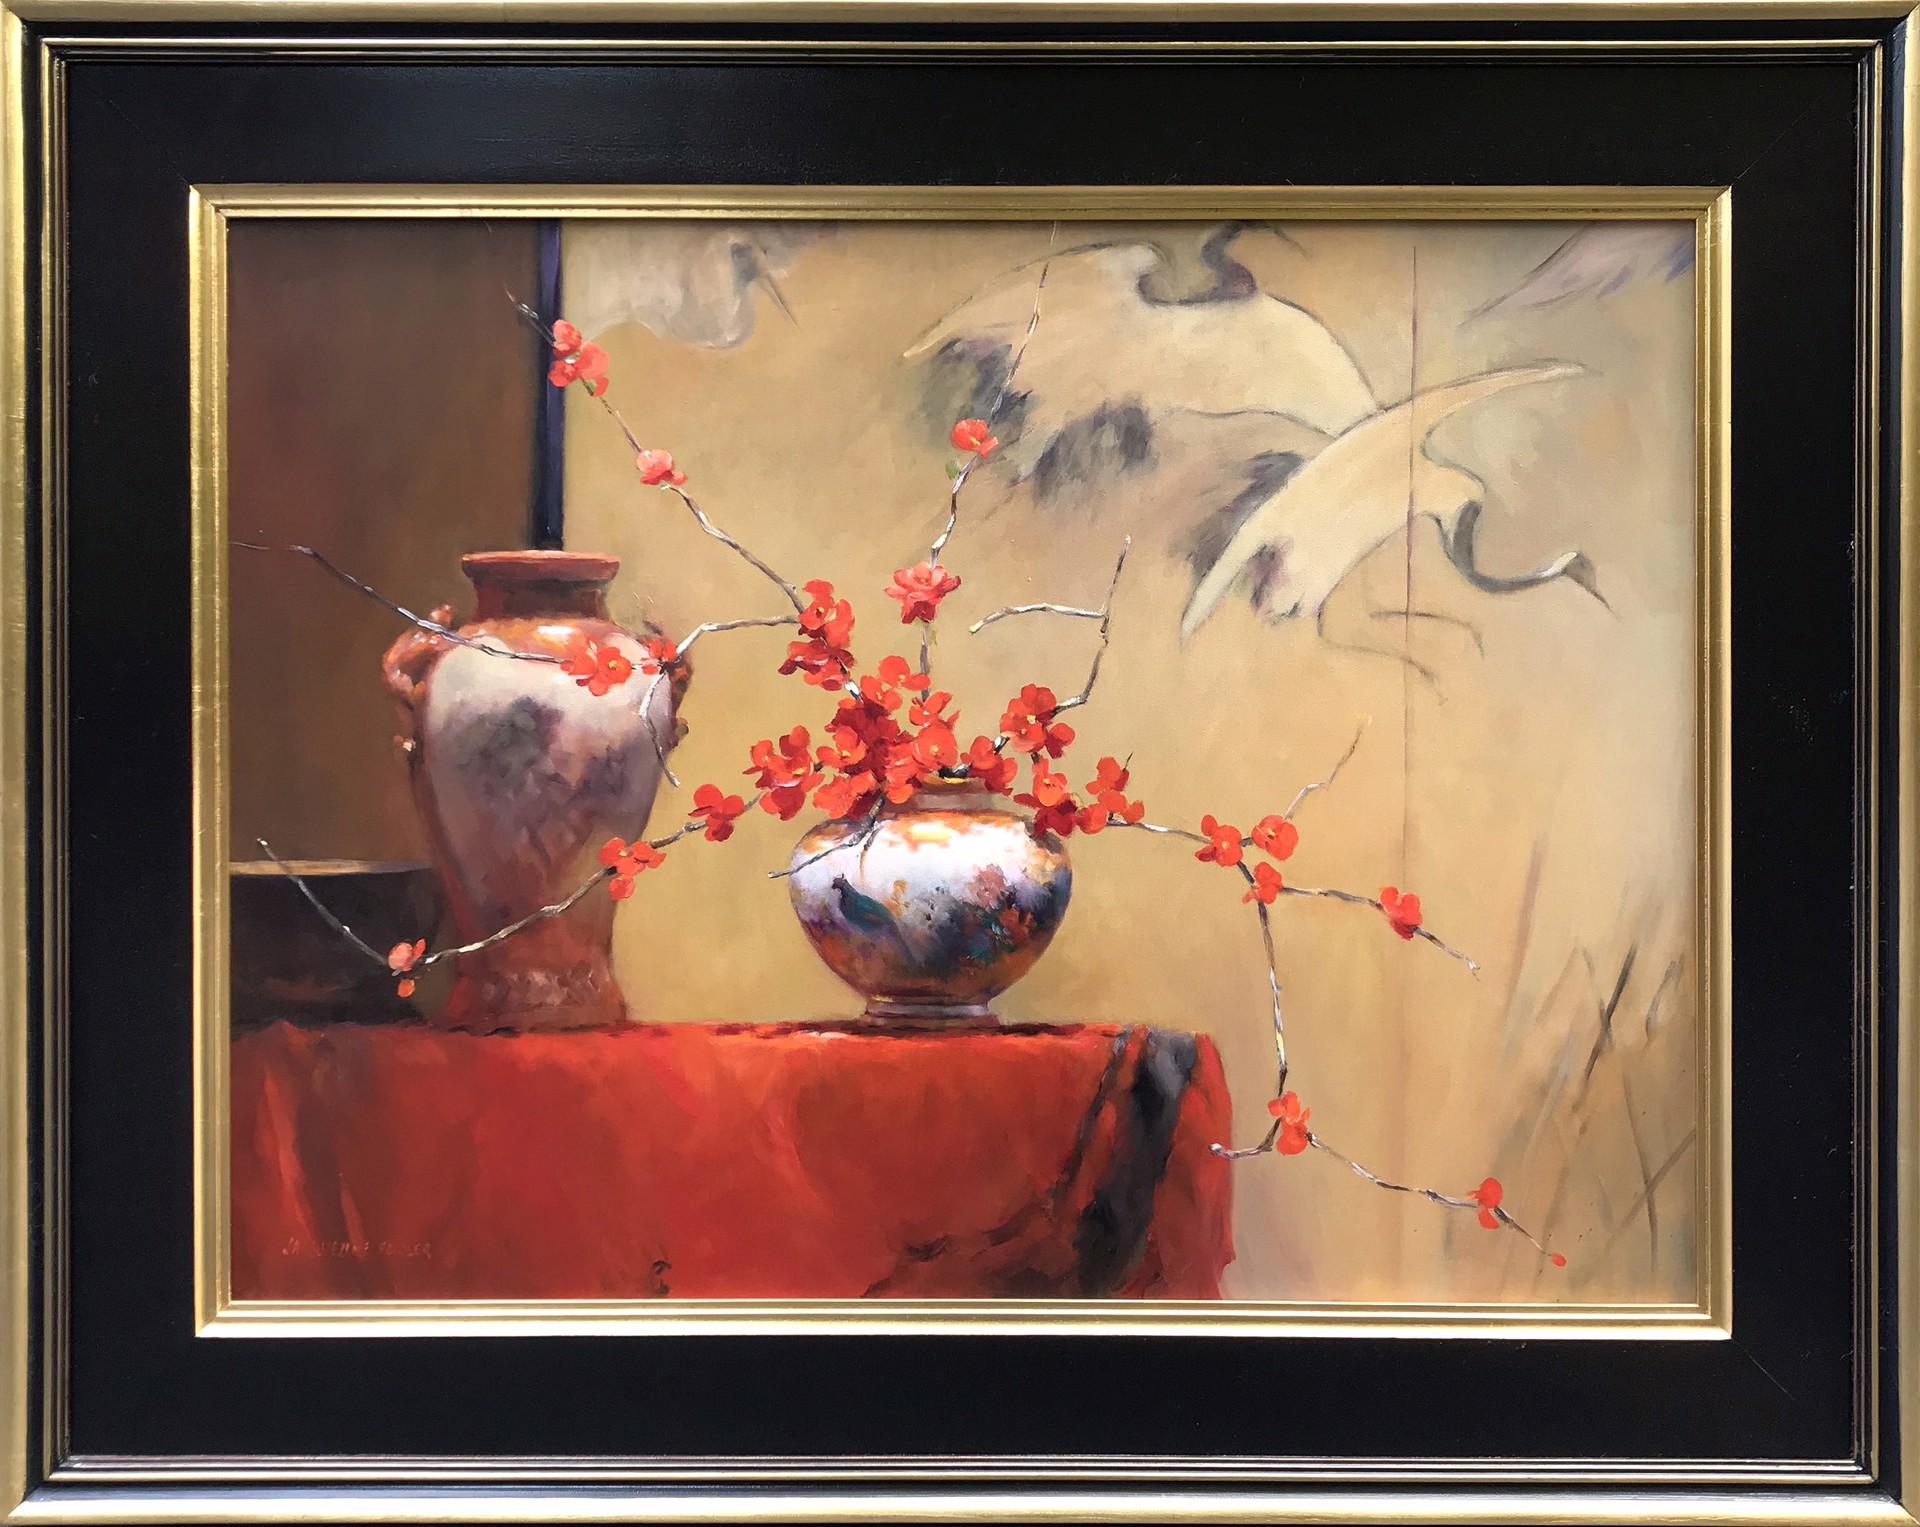 Cranes with Japonica by Jacqueline Fowler